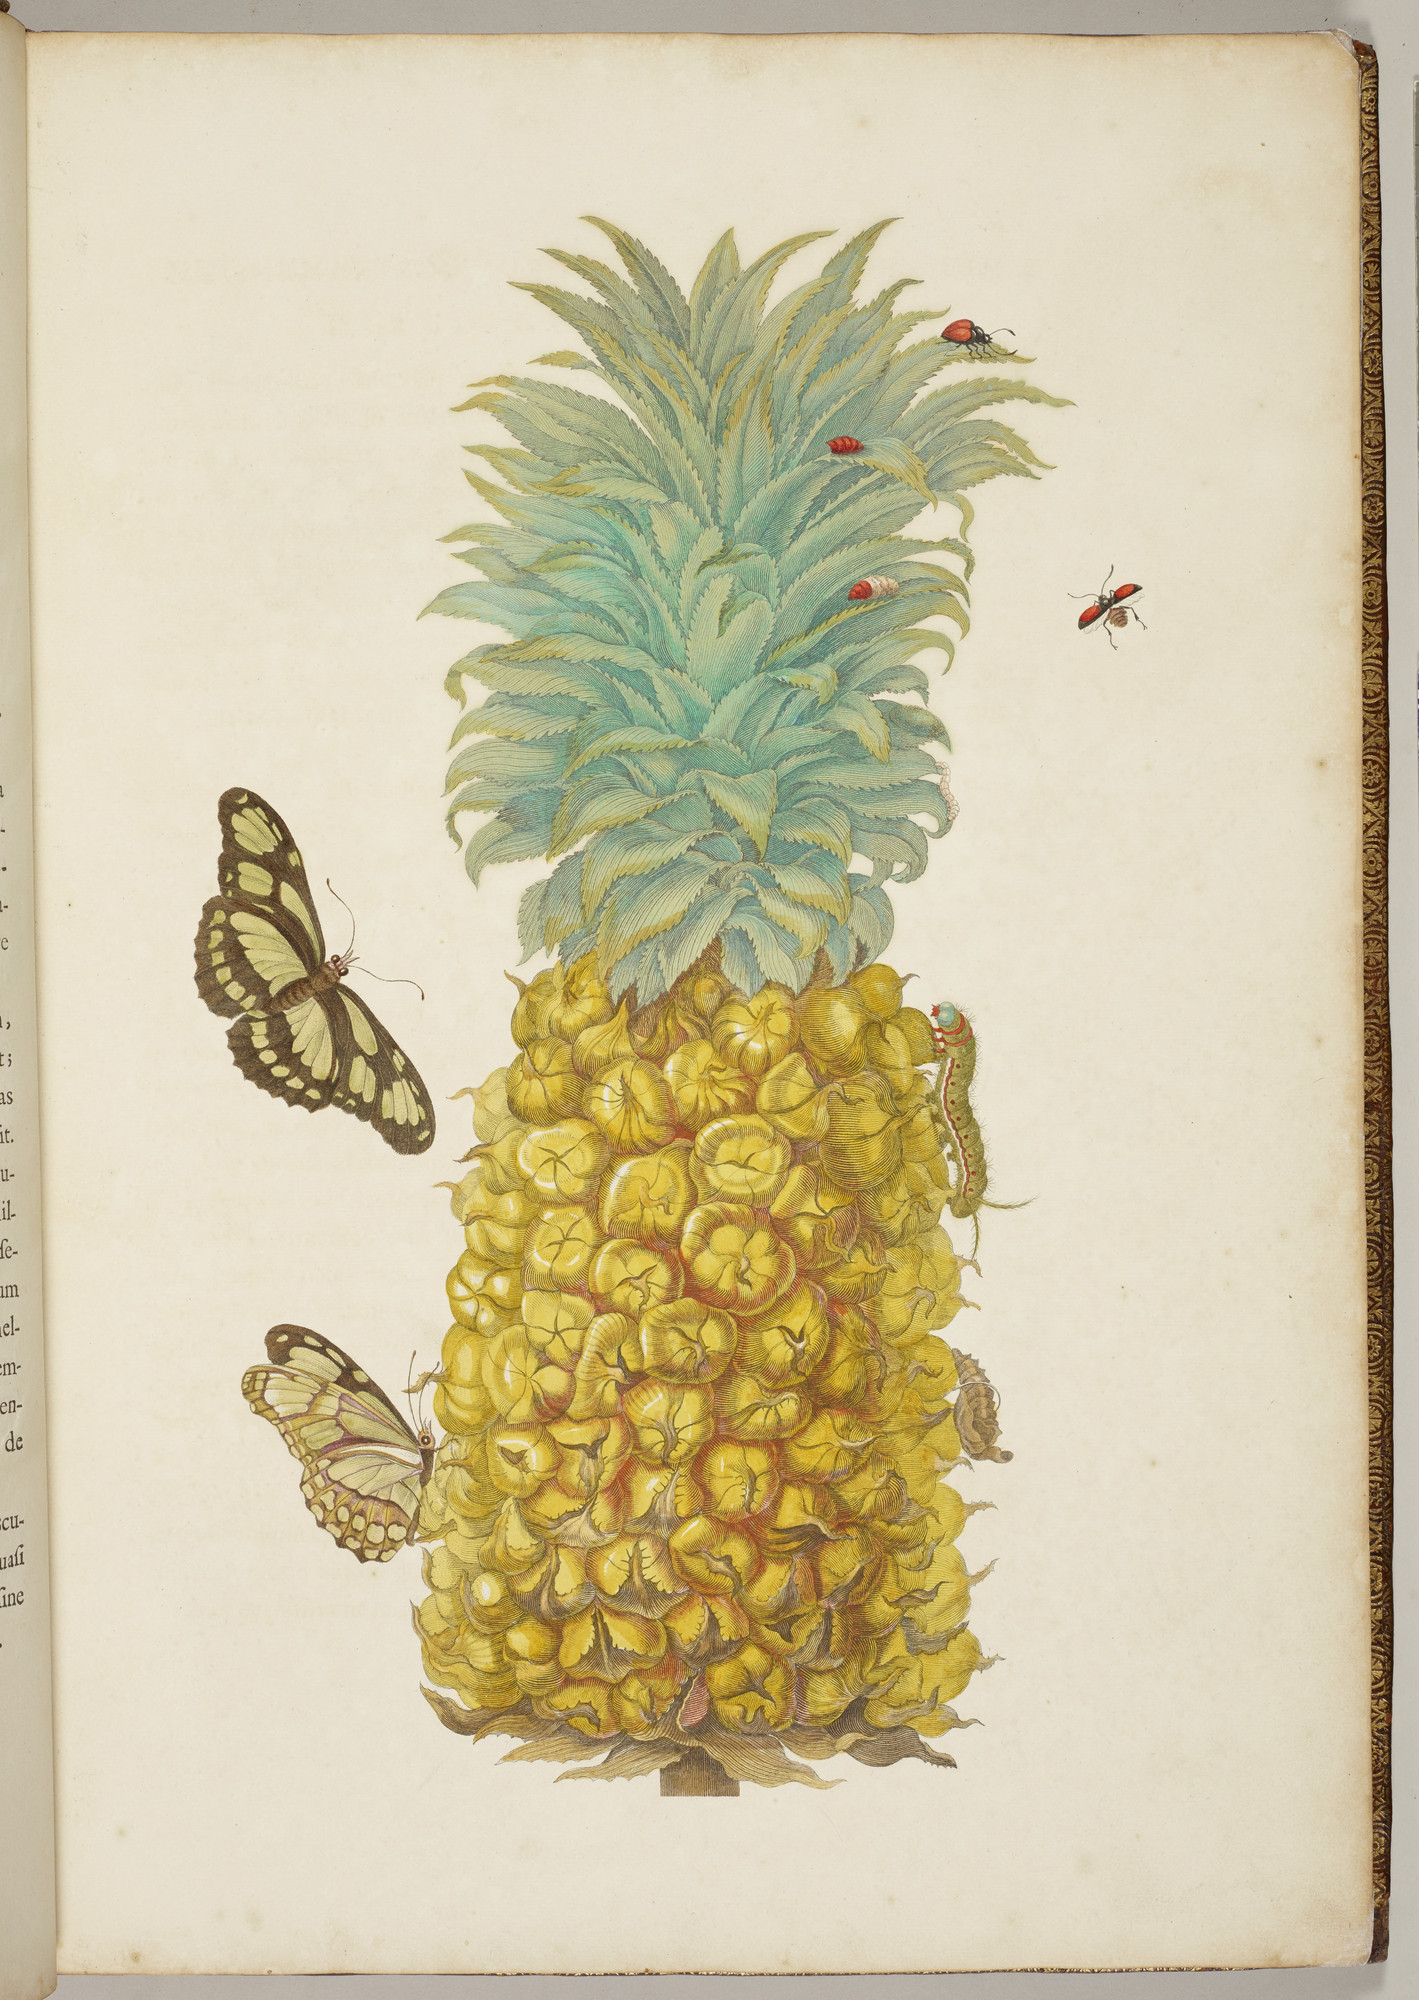 Ananas by Maria Sibylla Merian - 1705 - 53.0 x 4.0 cm Royal Collection Trust